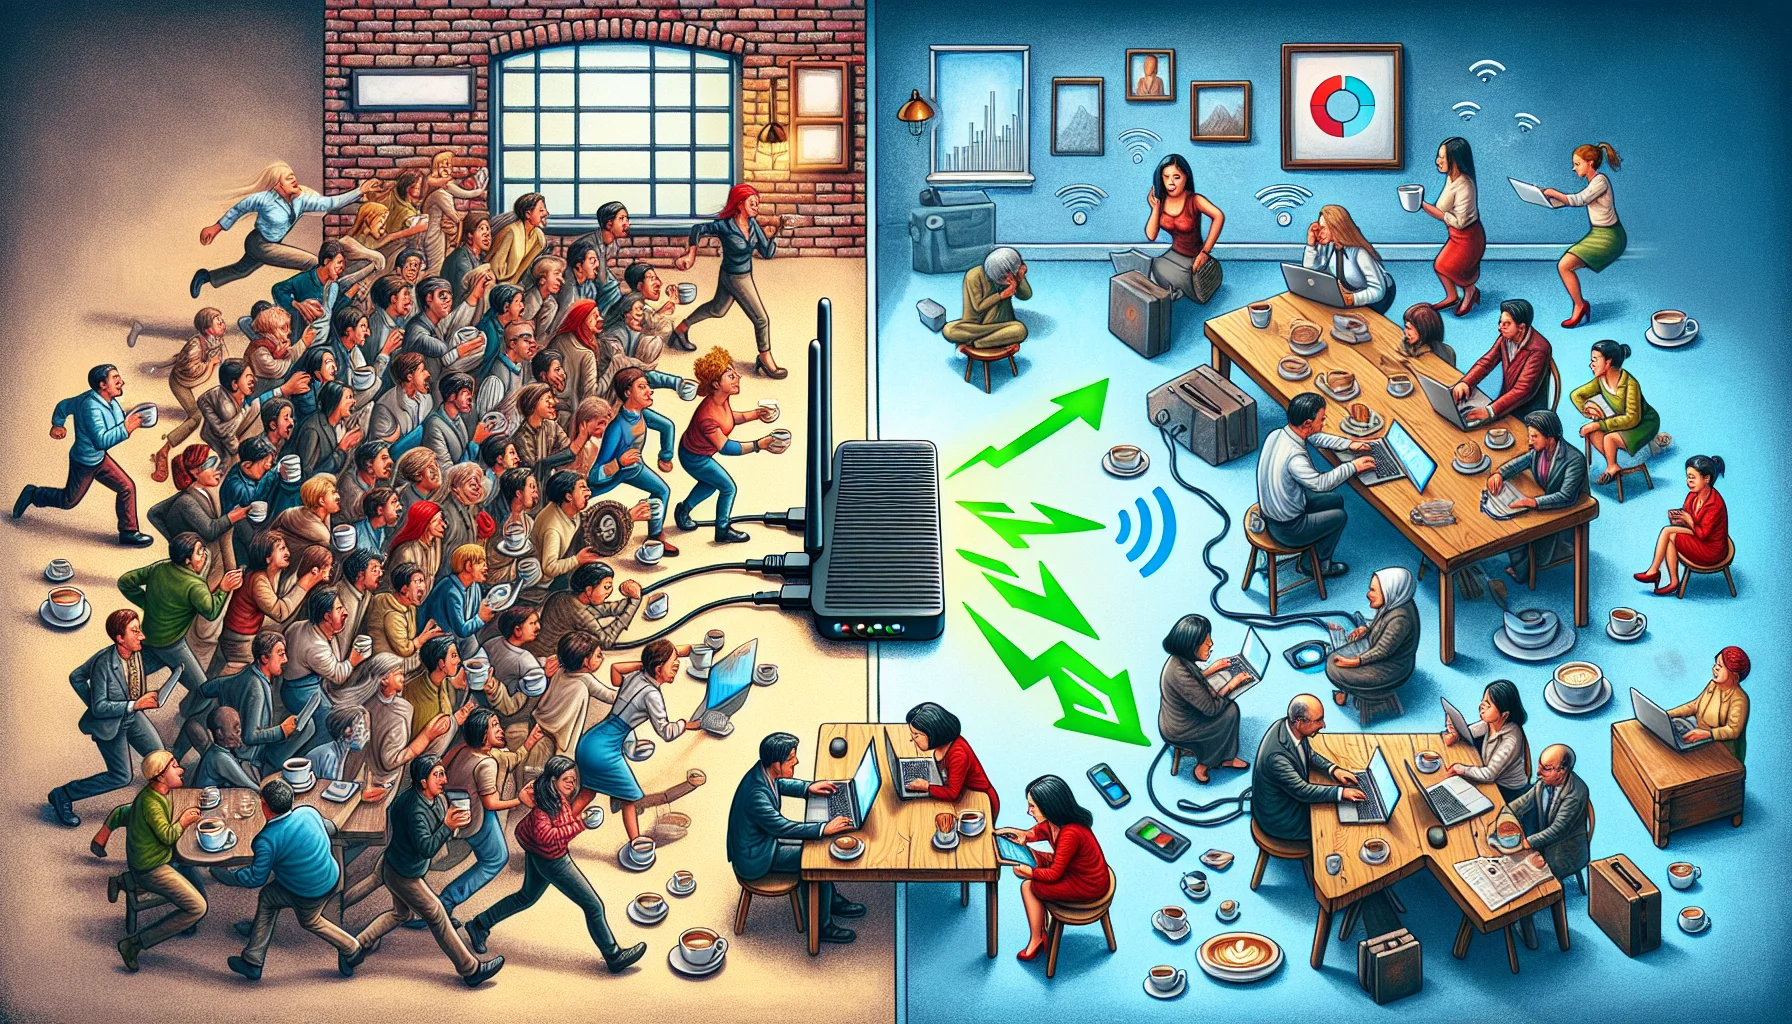 Create a humorous, realistic image representing the concept of shared hosting and dedicated hosting. On the left side, depict a bustling, crowded coffee shop filled with people of various genders and descents all attempting to connect to a single Wi-Fi router illustrated as a symbol of shared hosting. Emphasize the clutter of coffee cups, laptops, and network cords to represent overload. On the right side, envision a peaceful, tranquil home office setup with a single user, an East Asian woman, connected to a top-notch Wi-Fi router, representing dedicated hosting. Use visual metaphors like speed symbols and green check marks for a fast, uninterrupted connection to imply the advantages of dedicated hosting.